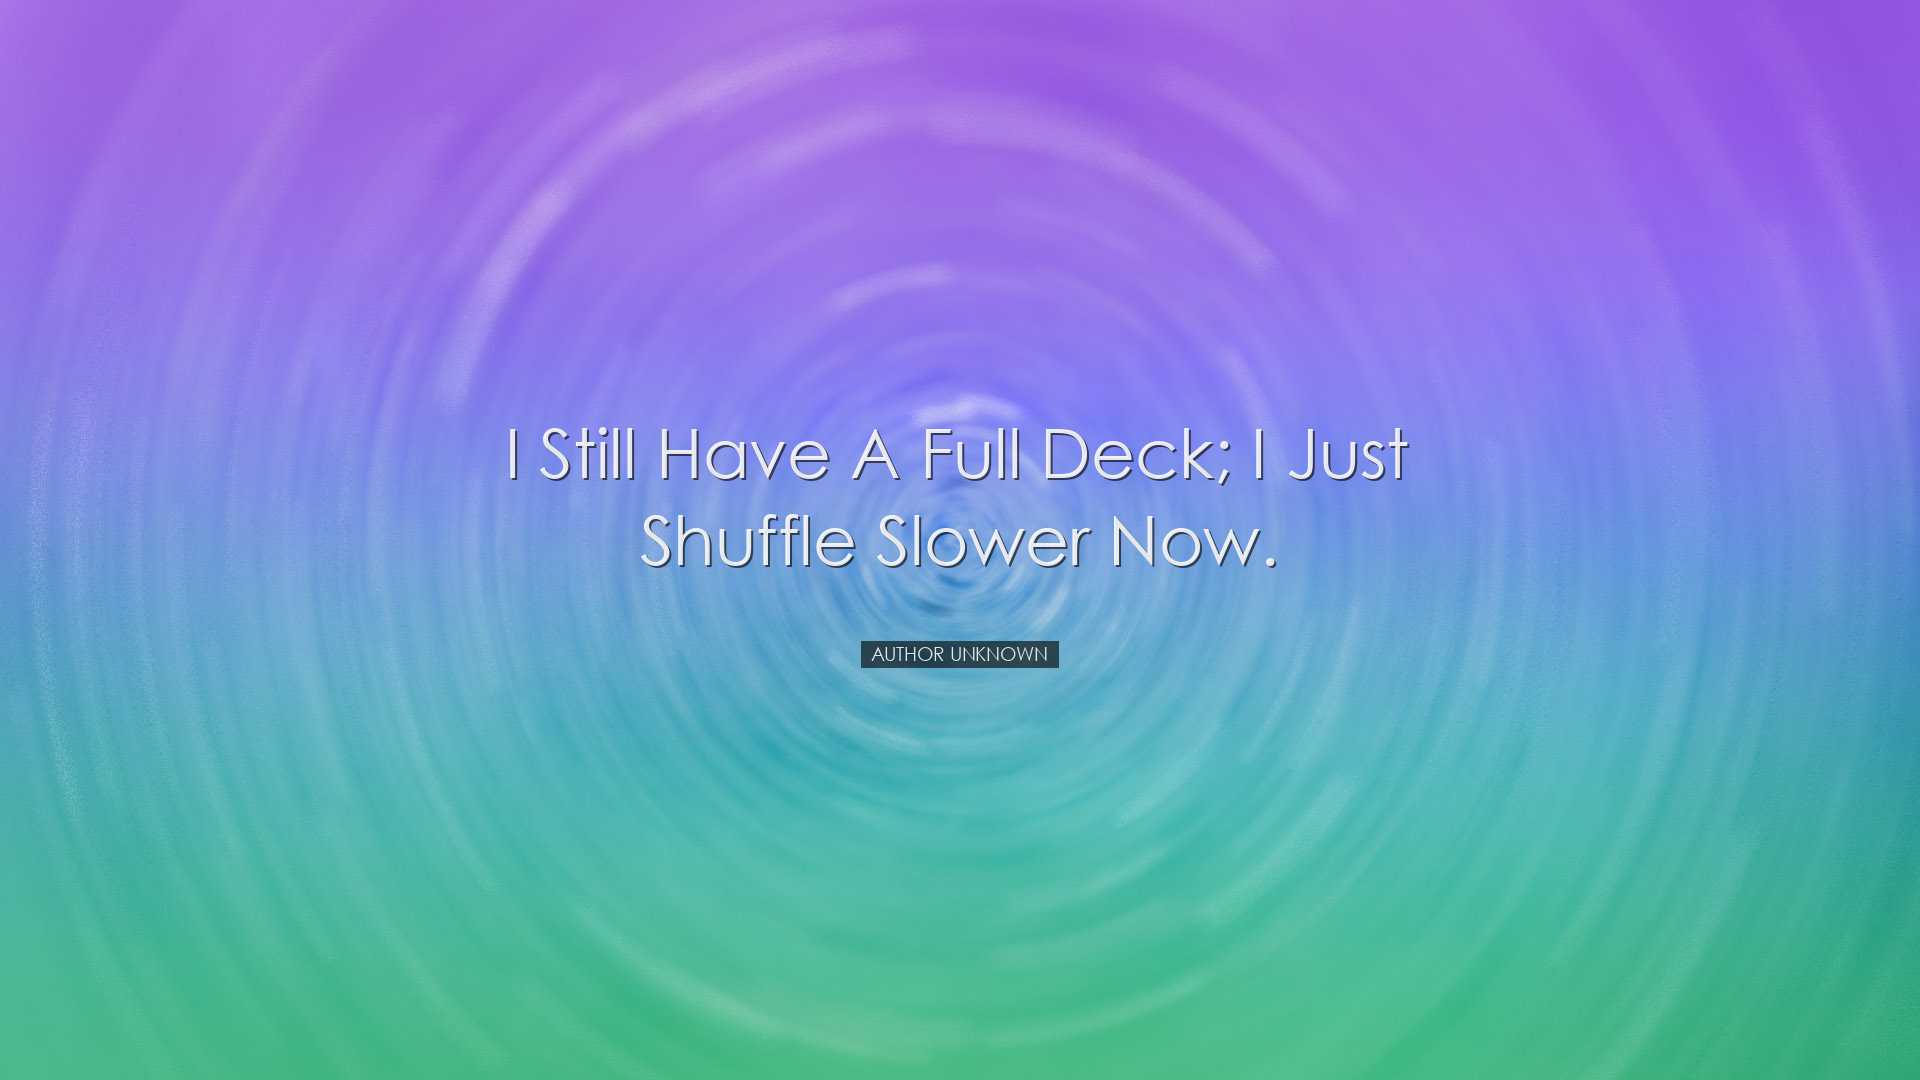 I still have a full deck; I just shuffle slower now. - Author Unkn